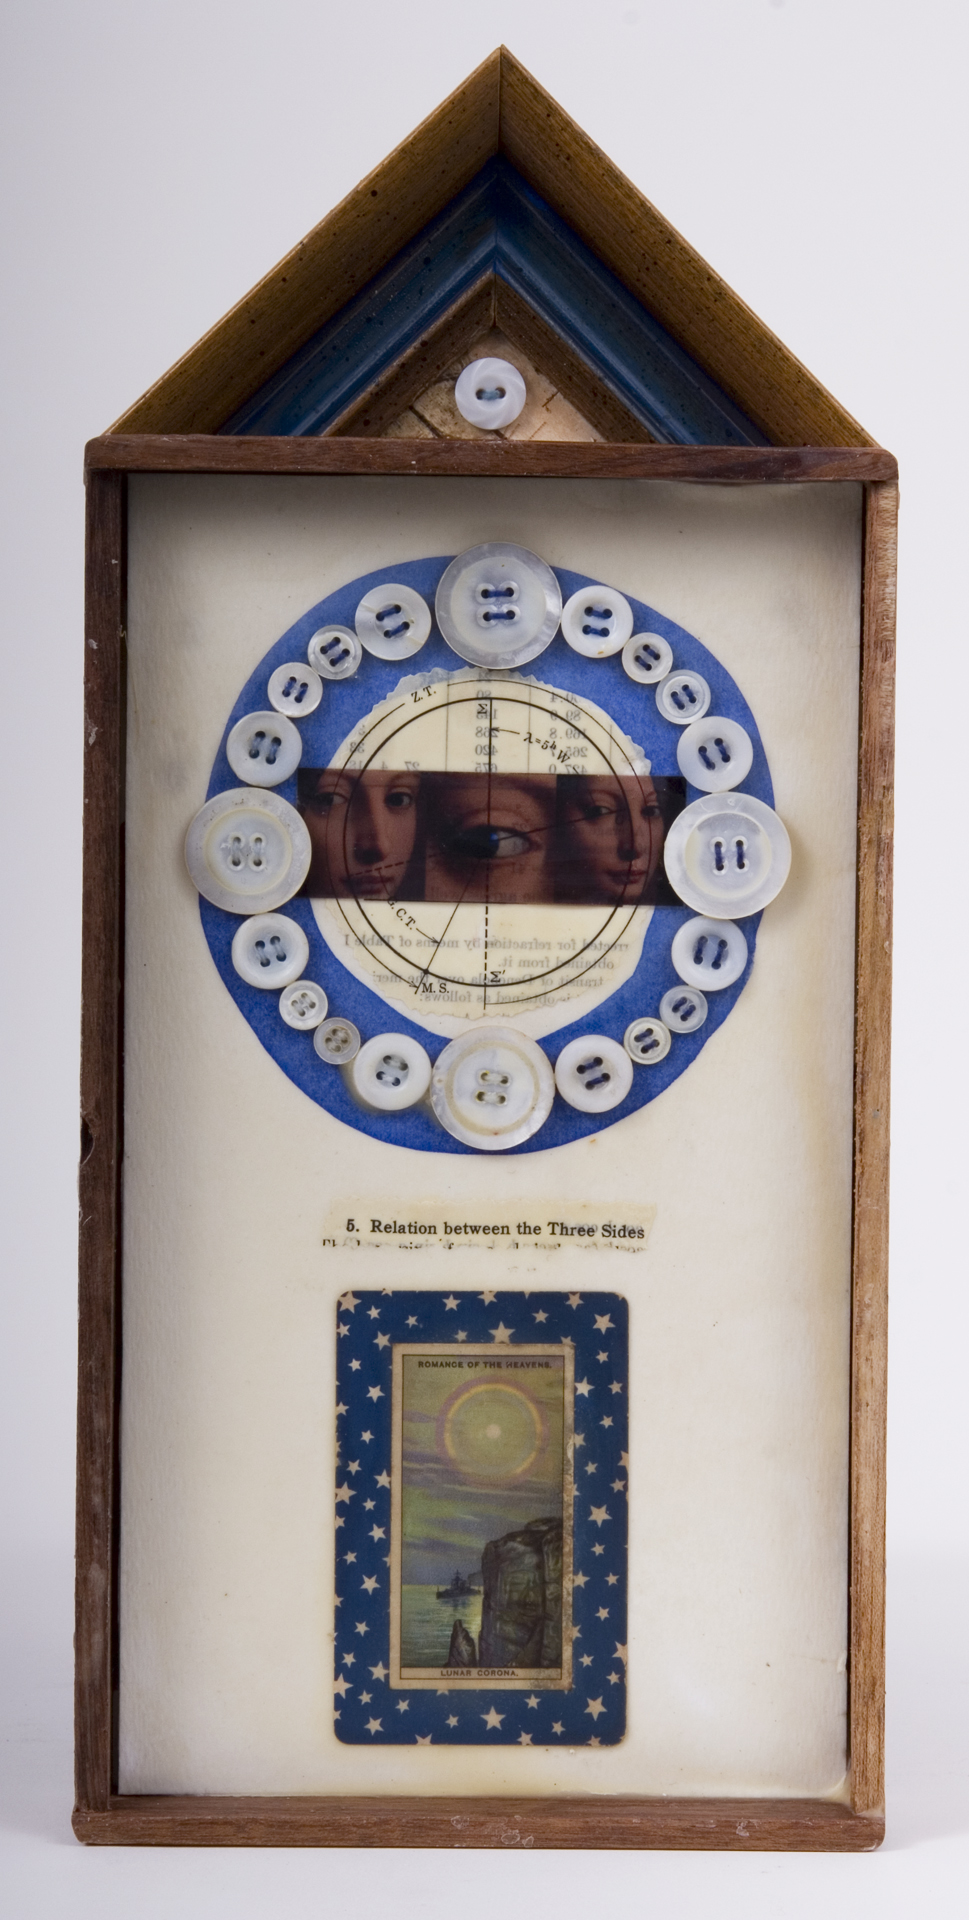     \"5. Relation Between the Three Sides\"
    mixed-media assemblage
    13.75 x 6.25 x 1.75
    2009
   SOLD
    Cigar box, frame sample, birch bark, mother of pearl buttons, fortune & tobac cards, transparency, ink, wax, astronomy text on watercolor paper